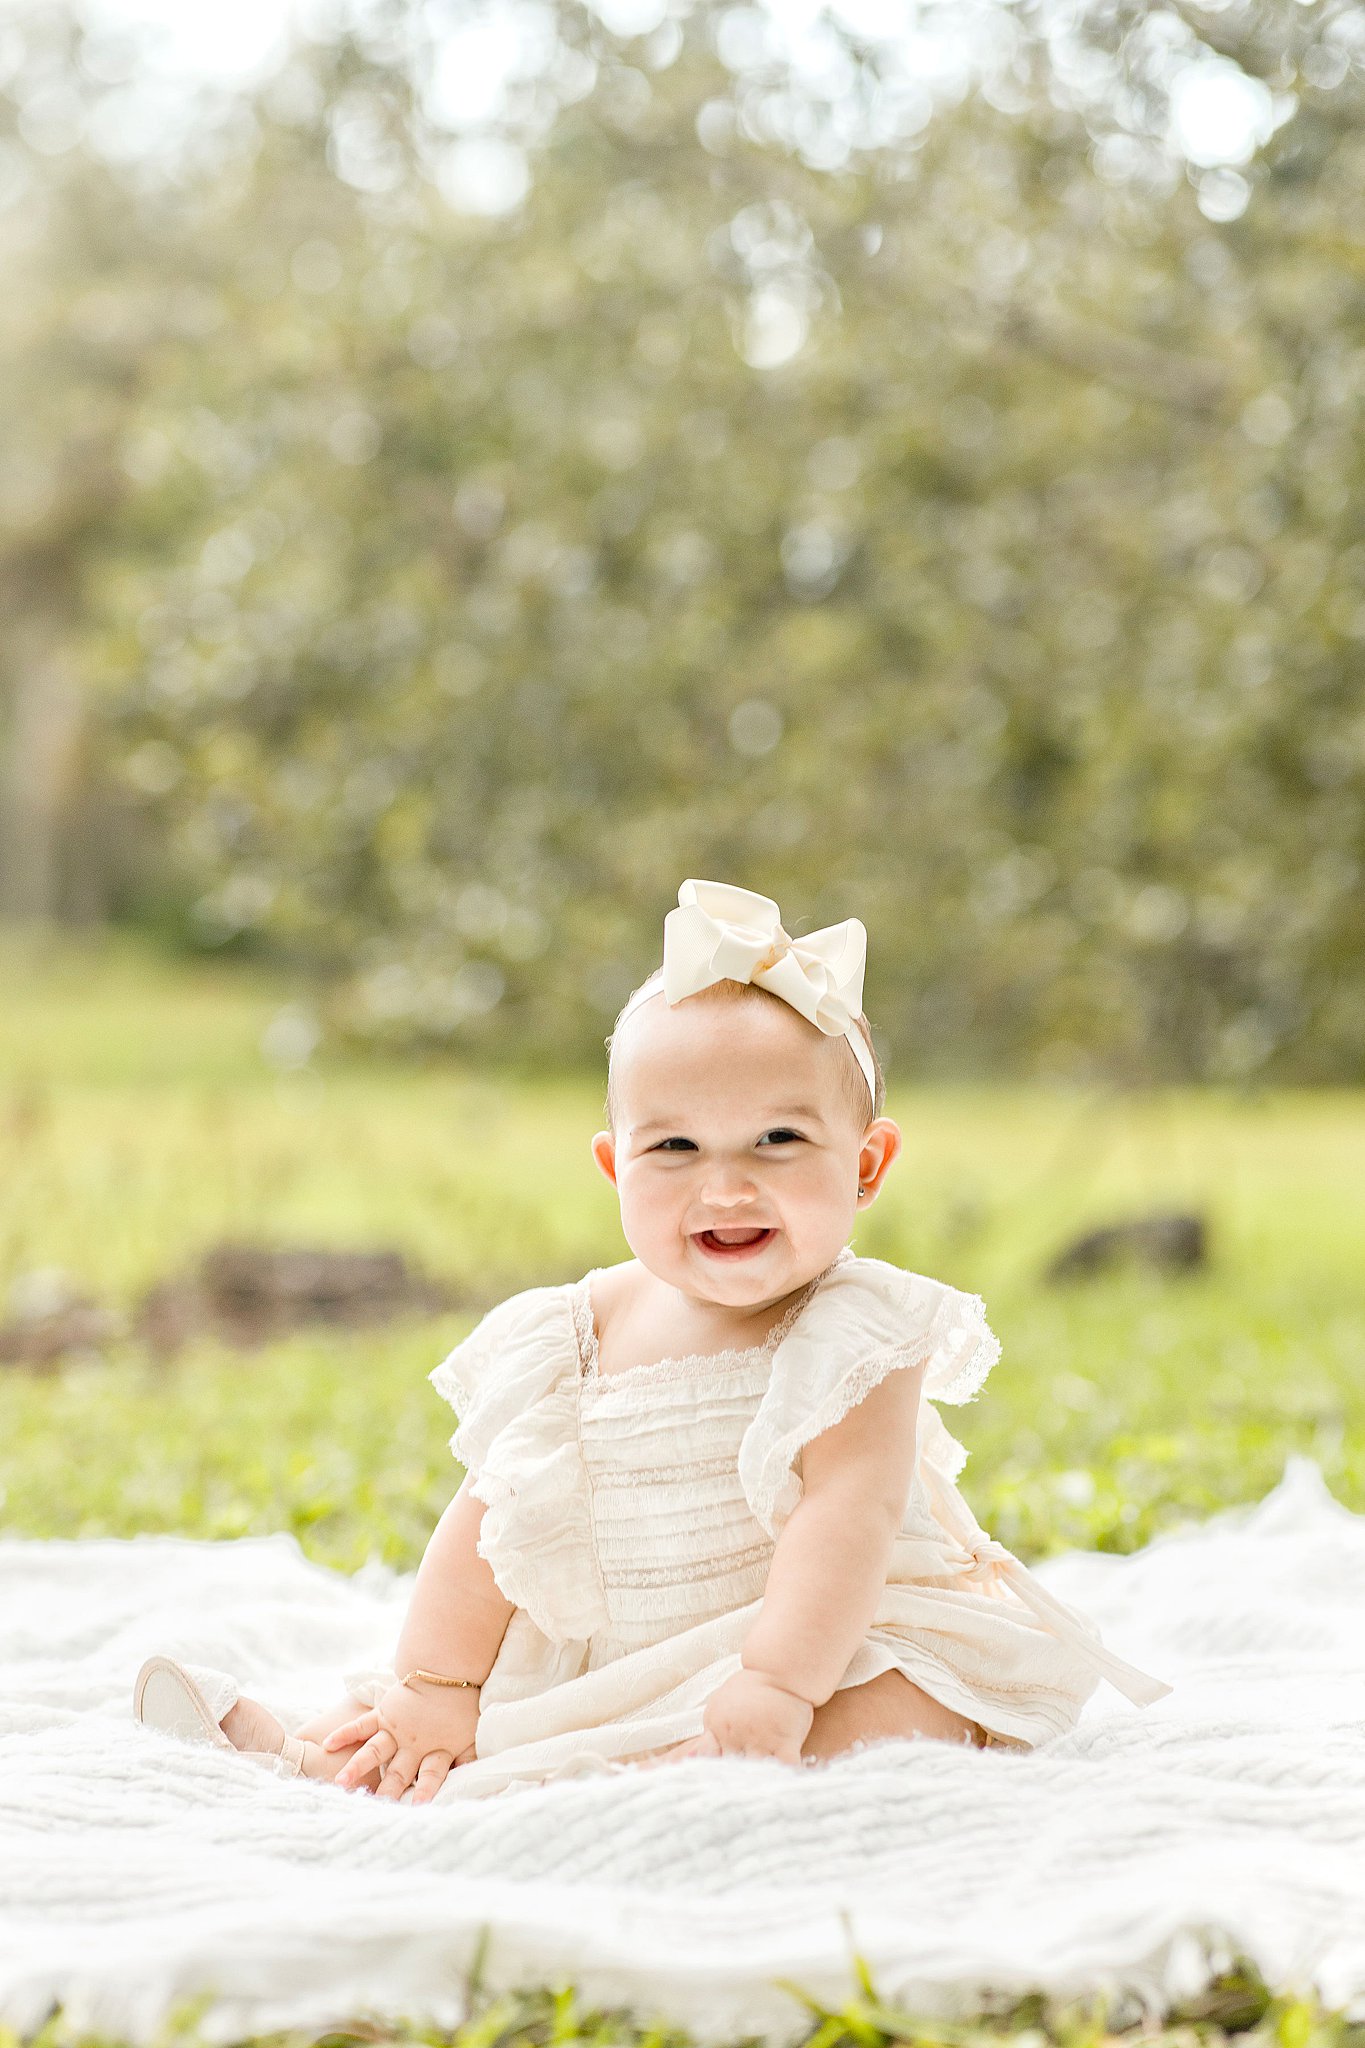 Toddler sits on a blanket in a grassy field wearing a white dress miami beach pediatricians